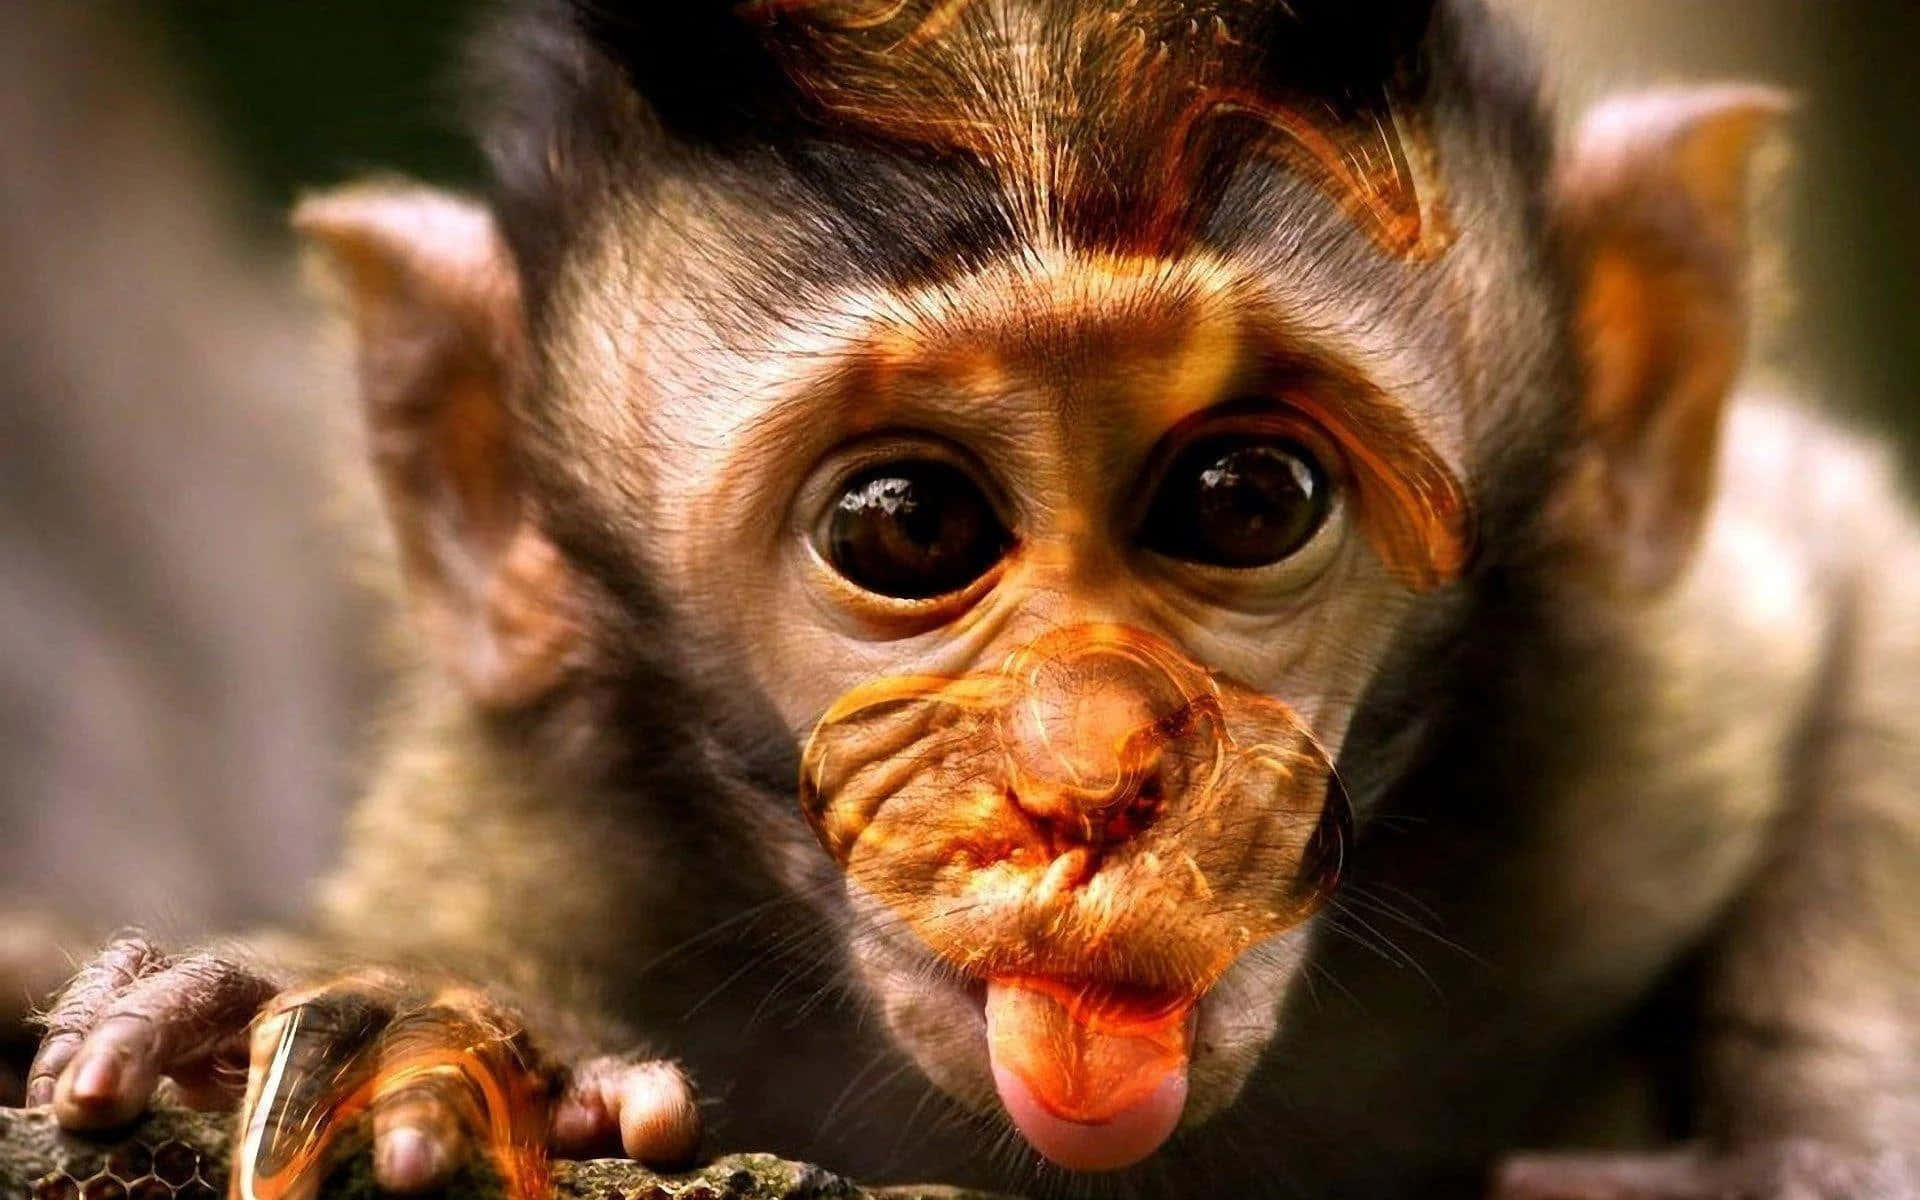 A Monkey With A Red Face Is Sticking Its Tongue Out